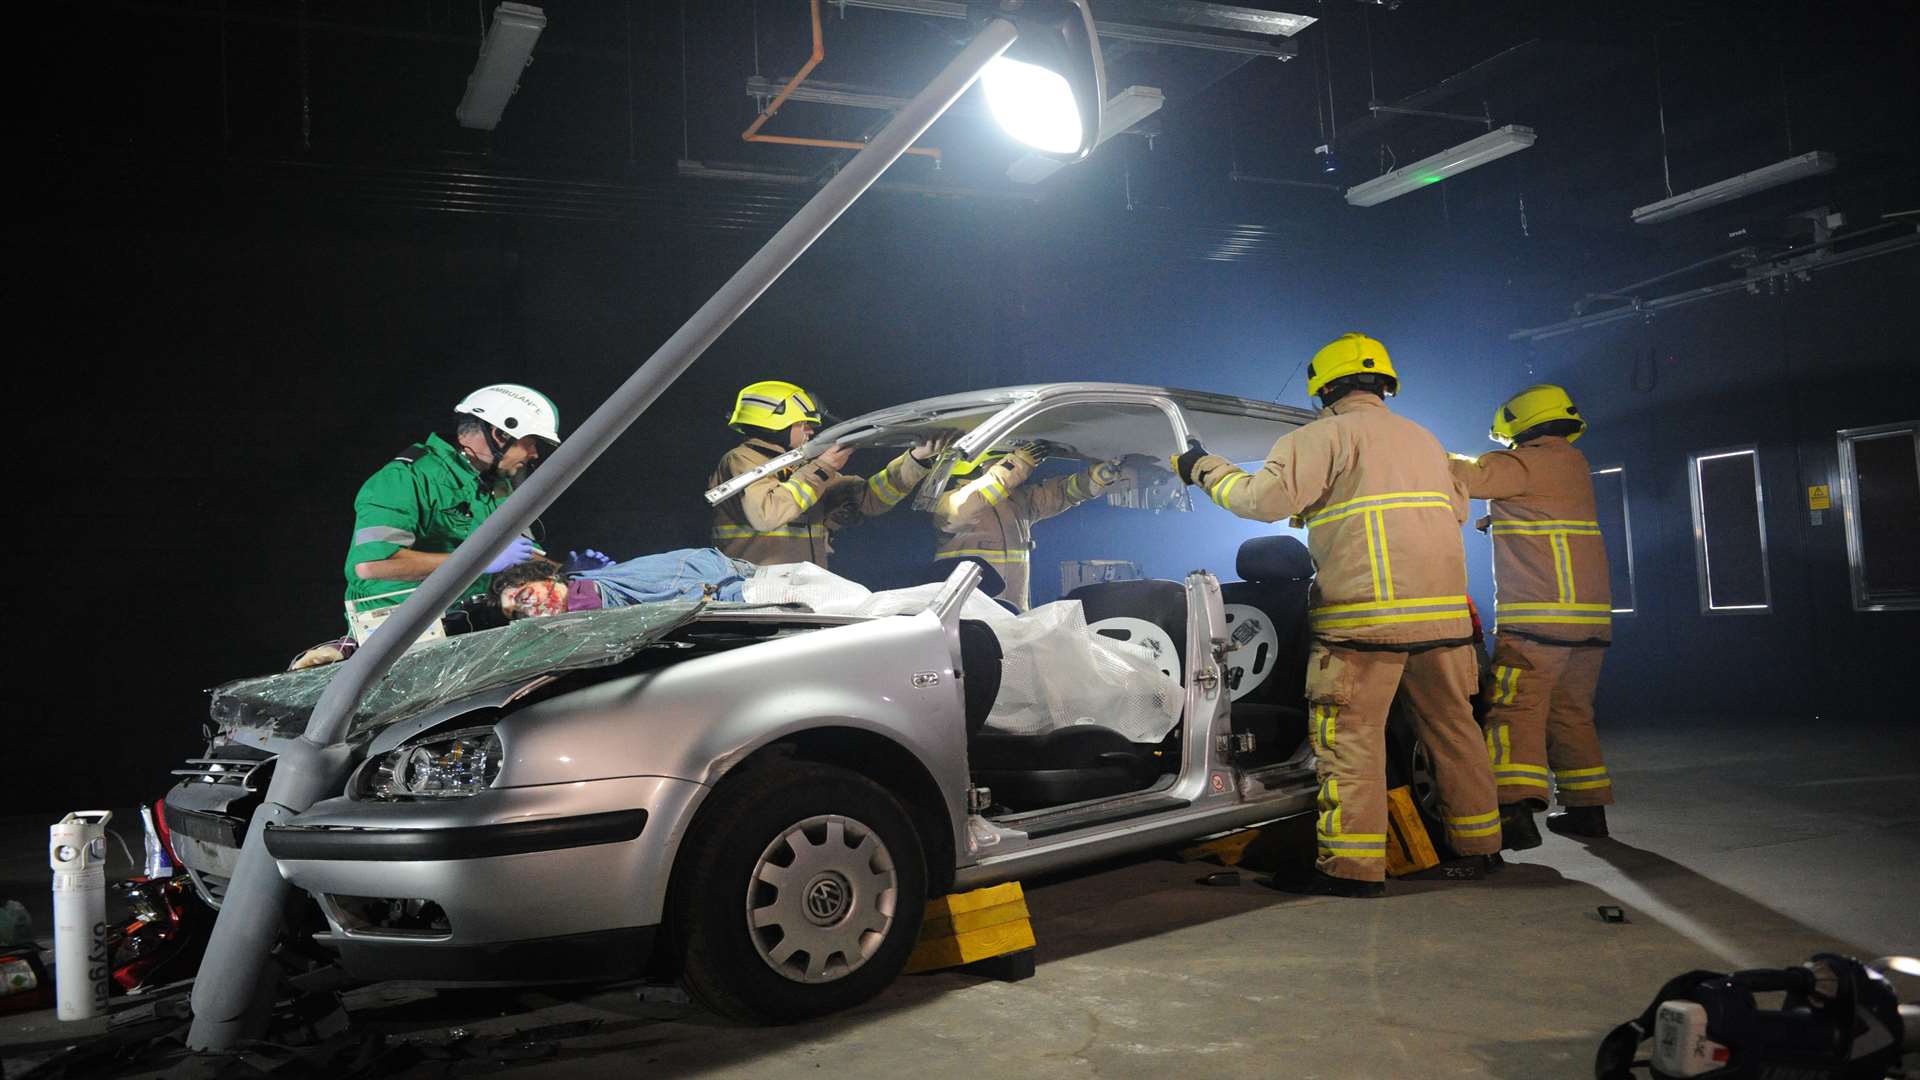 Firefighters at the new road safety education centre